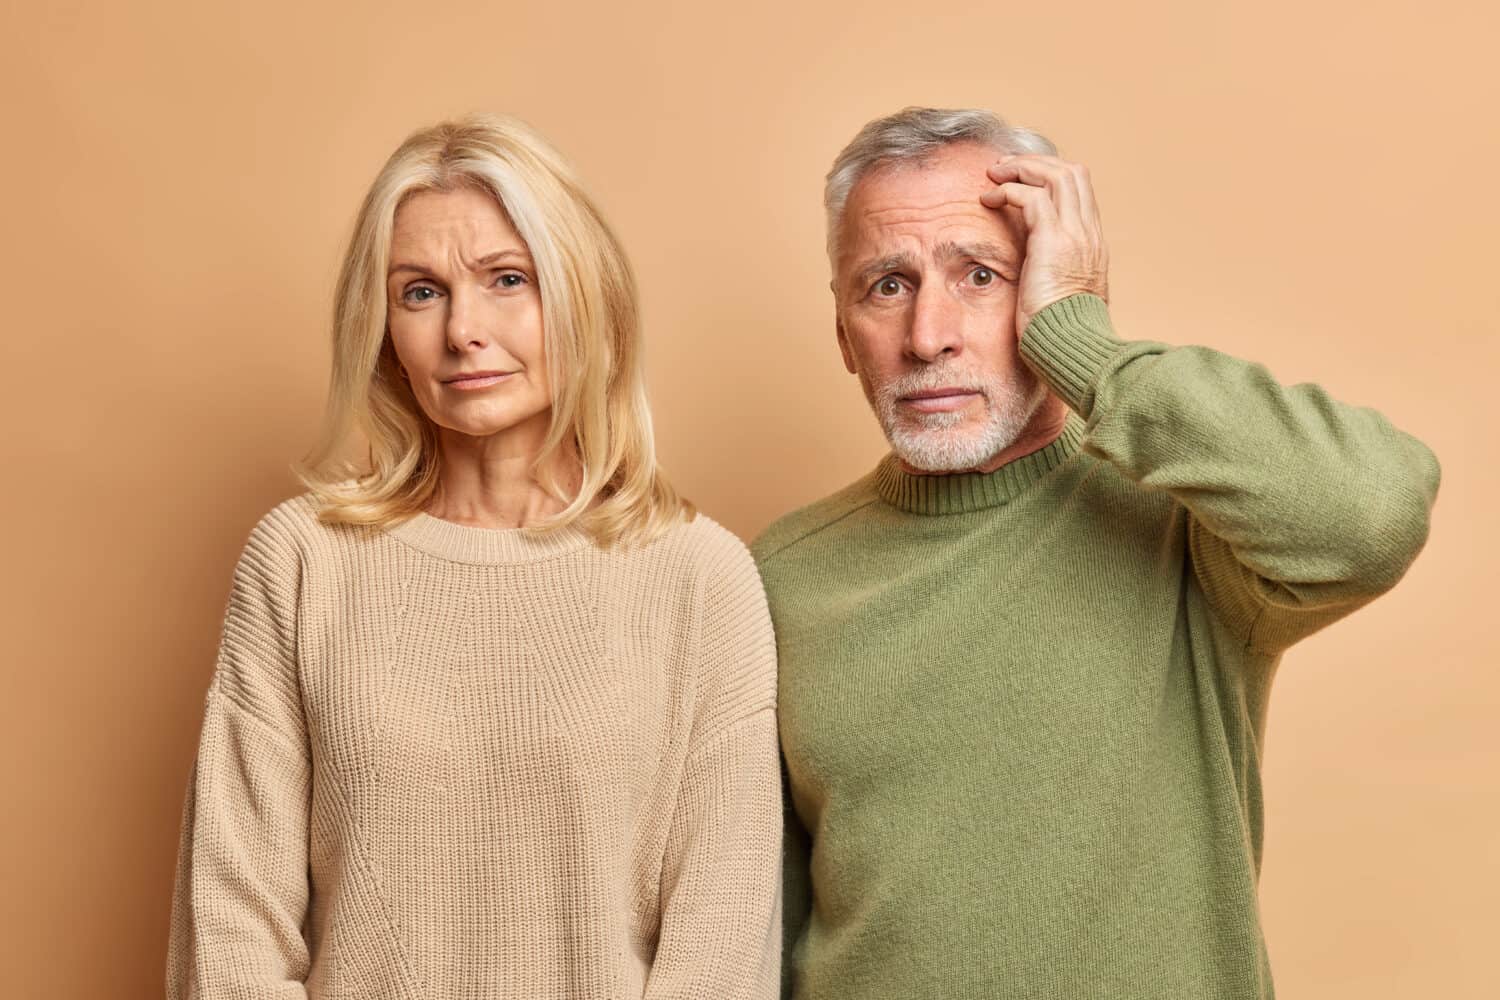 Tired displeased blonde wrinkled woman looks calmly at camera and embarrassed troublesome man looks with panic and fearful expression isolated over brown wall. Old people emotions reaction concept